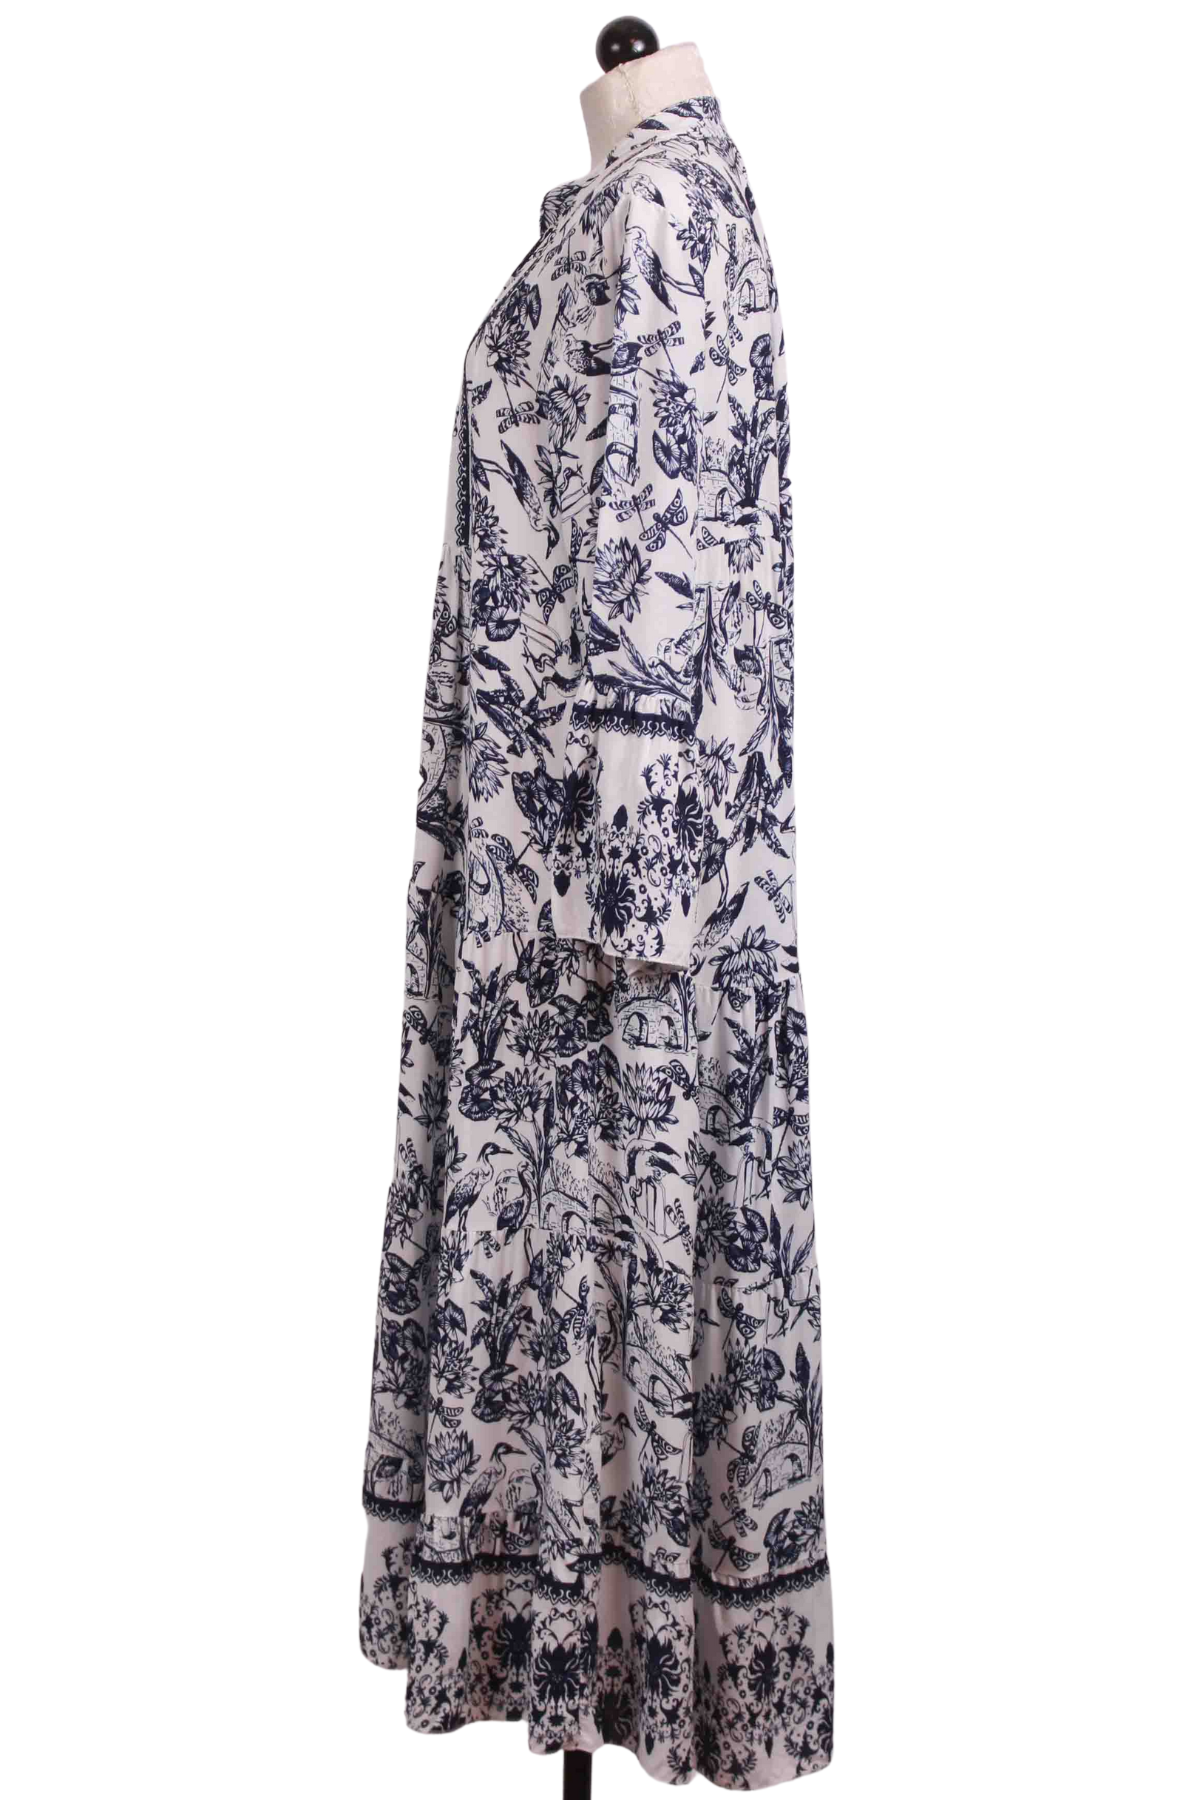 side view of Navy and White Floral Ruth Midi Length Dress by Scandal Italy